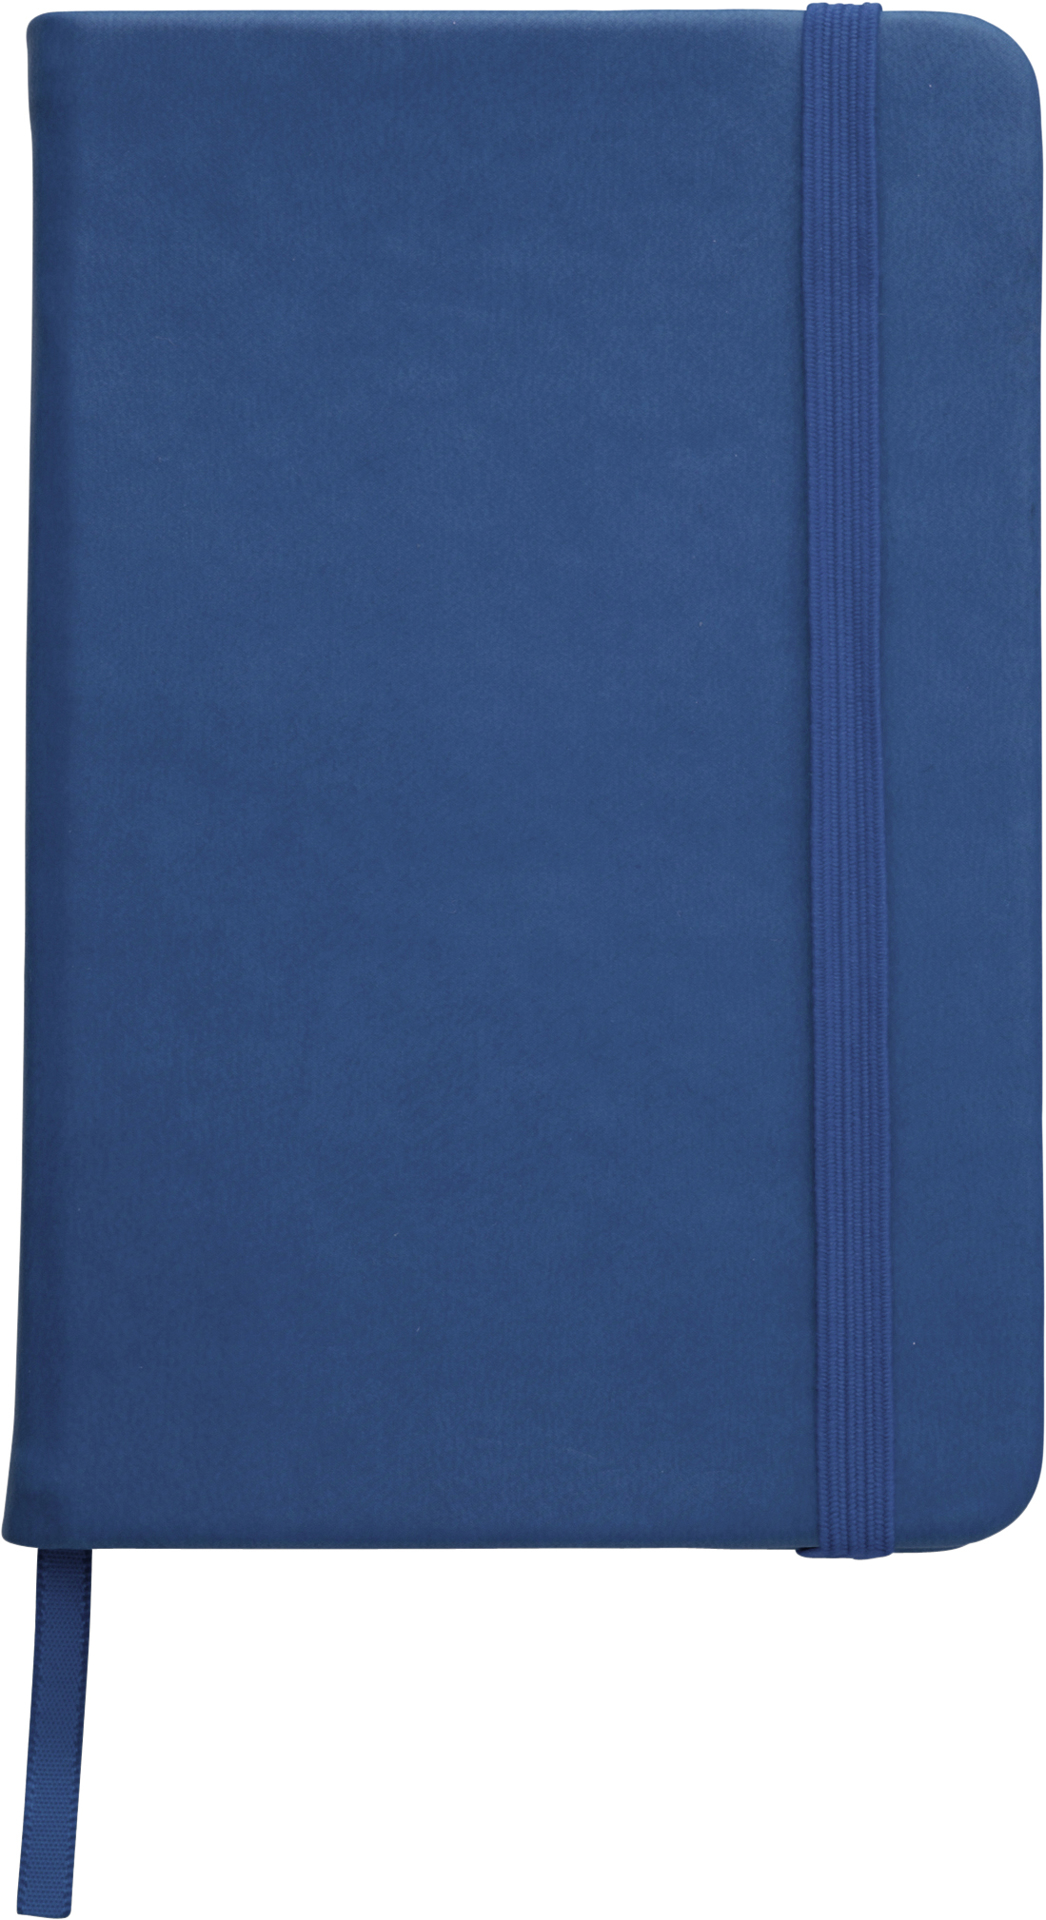 A6 Notebook with soft PU cover in blue